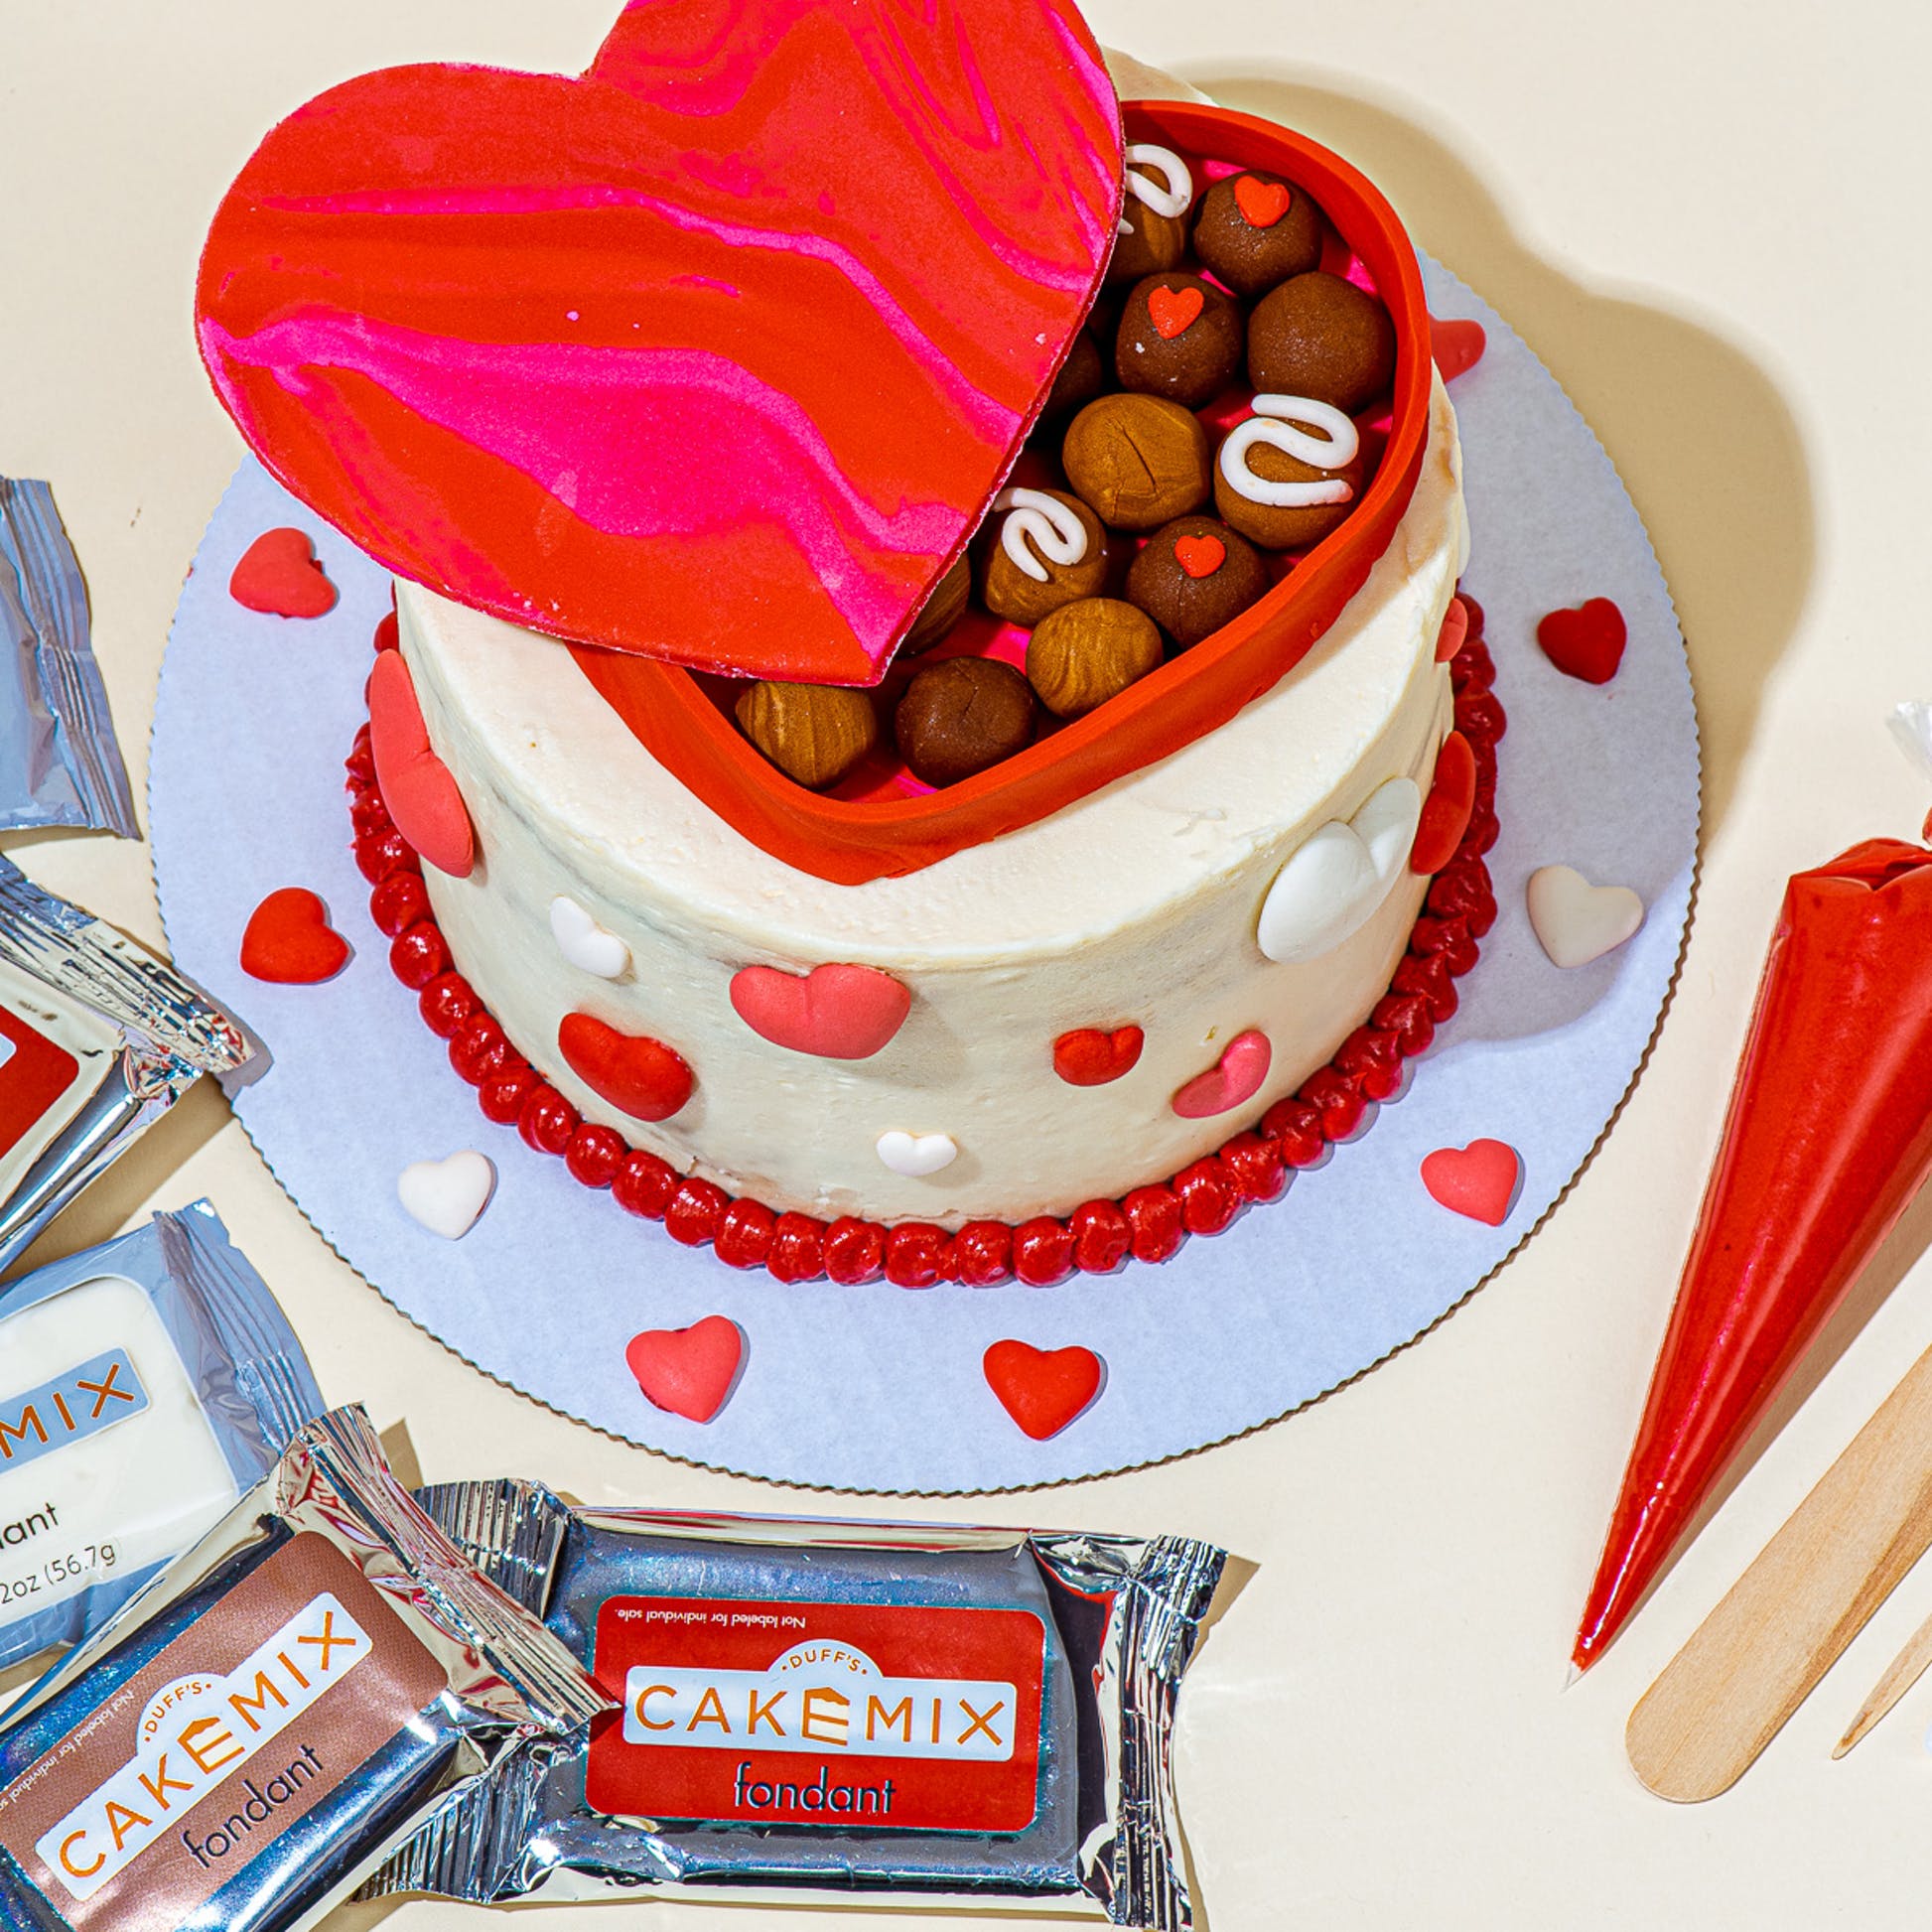 Cake Kits Are On Trend for DIY Bakers | Progressive Grocer